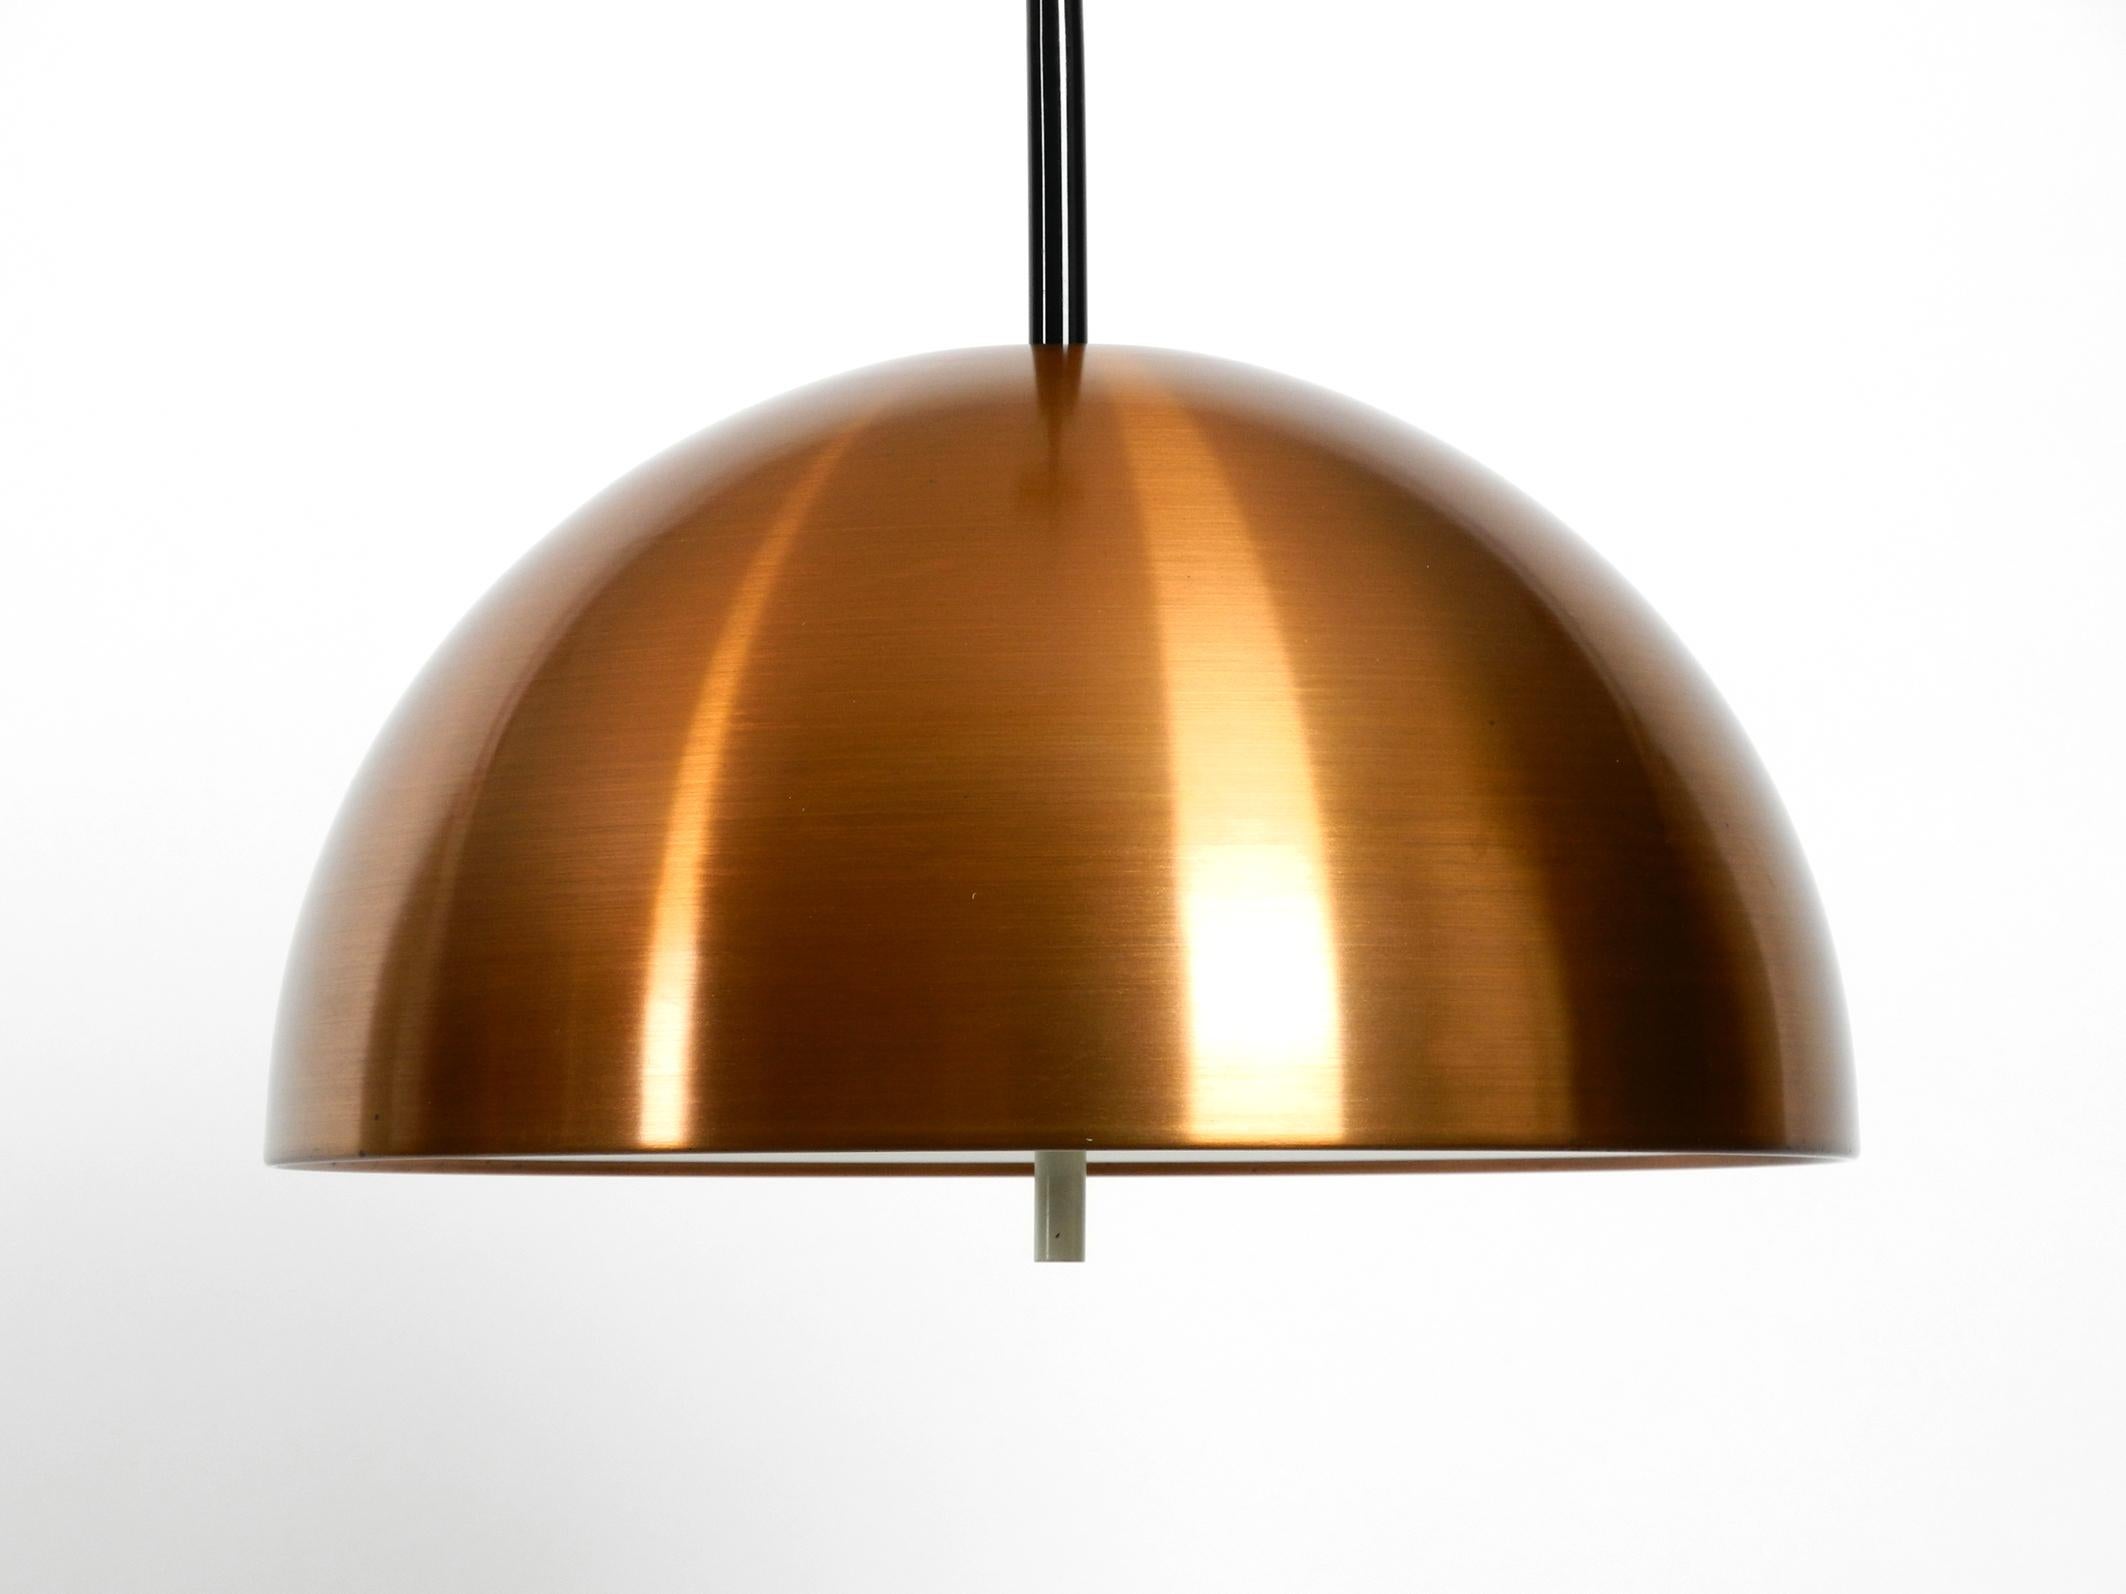 Very elegant, rare, large original 1970s Staff pendant lamp with a copper shade.
Great Space Age design from the 1970s.
Copper shade painted white inside and with a plastic cover for glare-free light.
Two original sockets for 100 watts